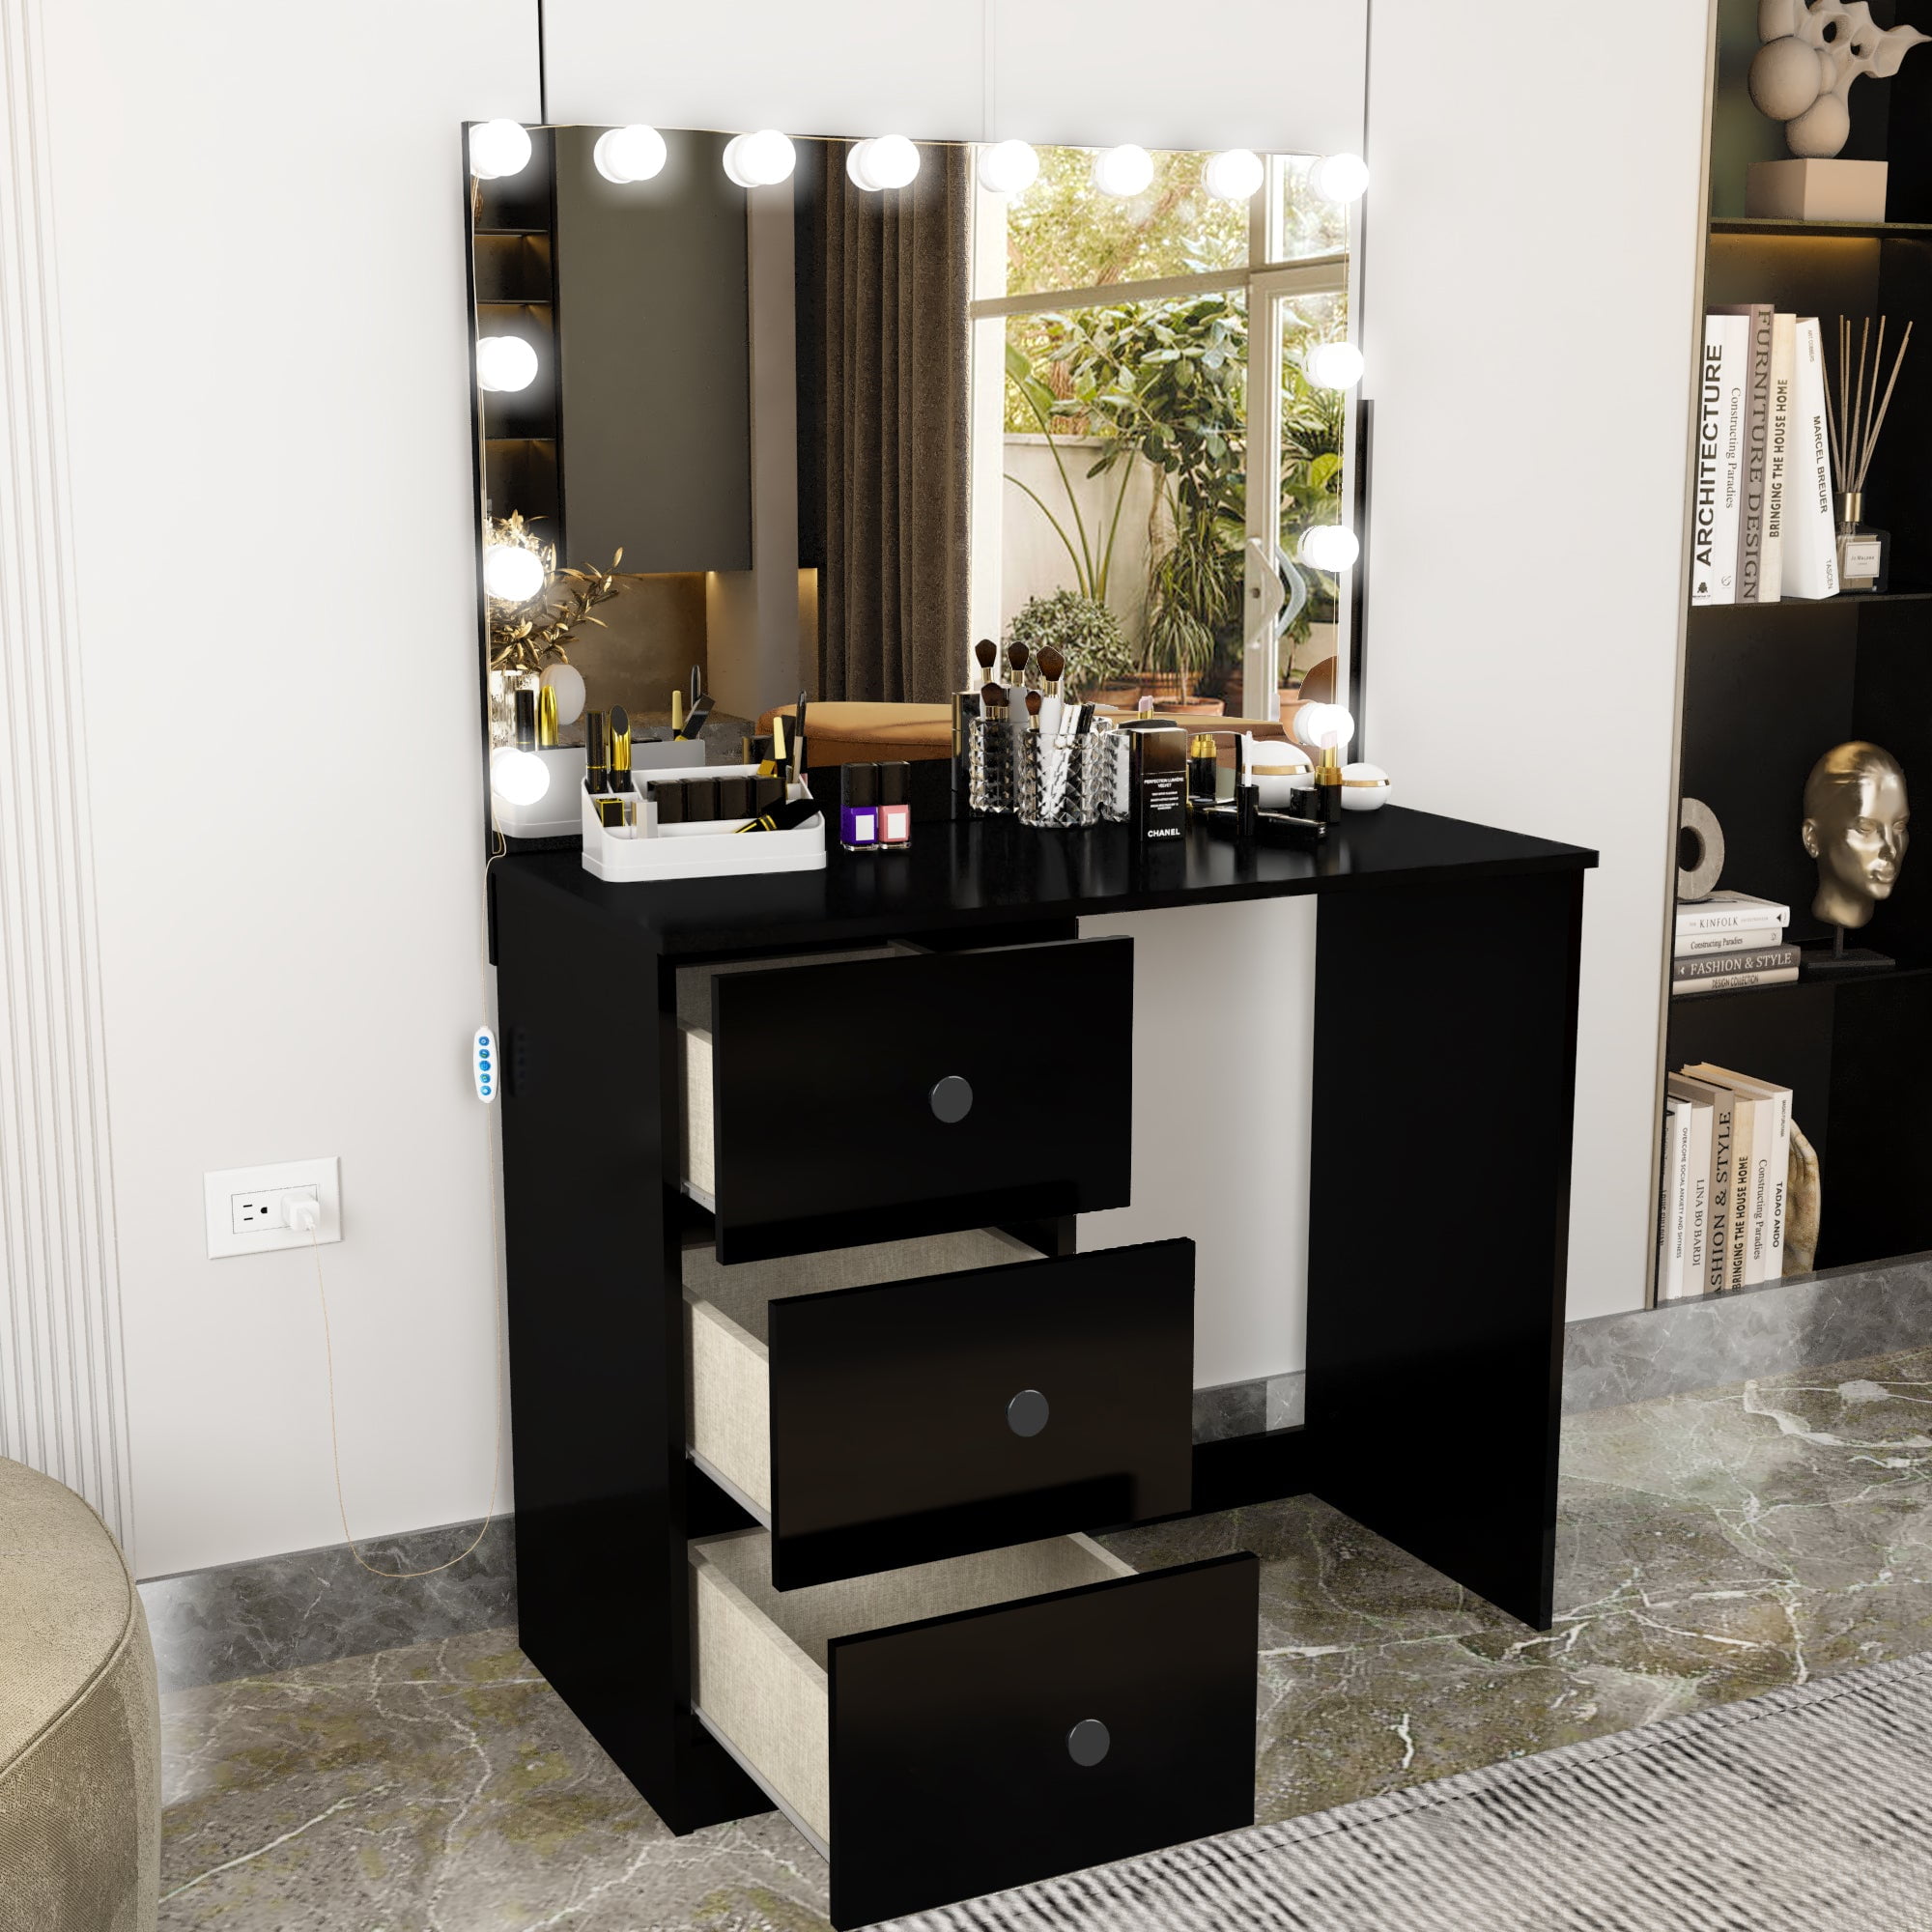 Dressing Table: Buy Wooden Dressing Table Online - Best Designs in India |  Saraf Furniture